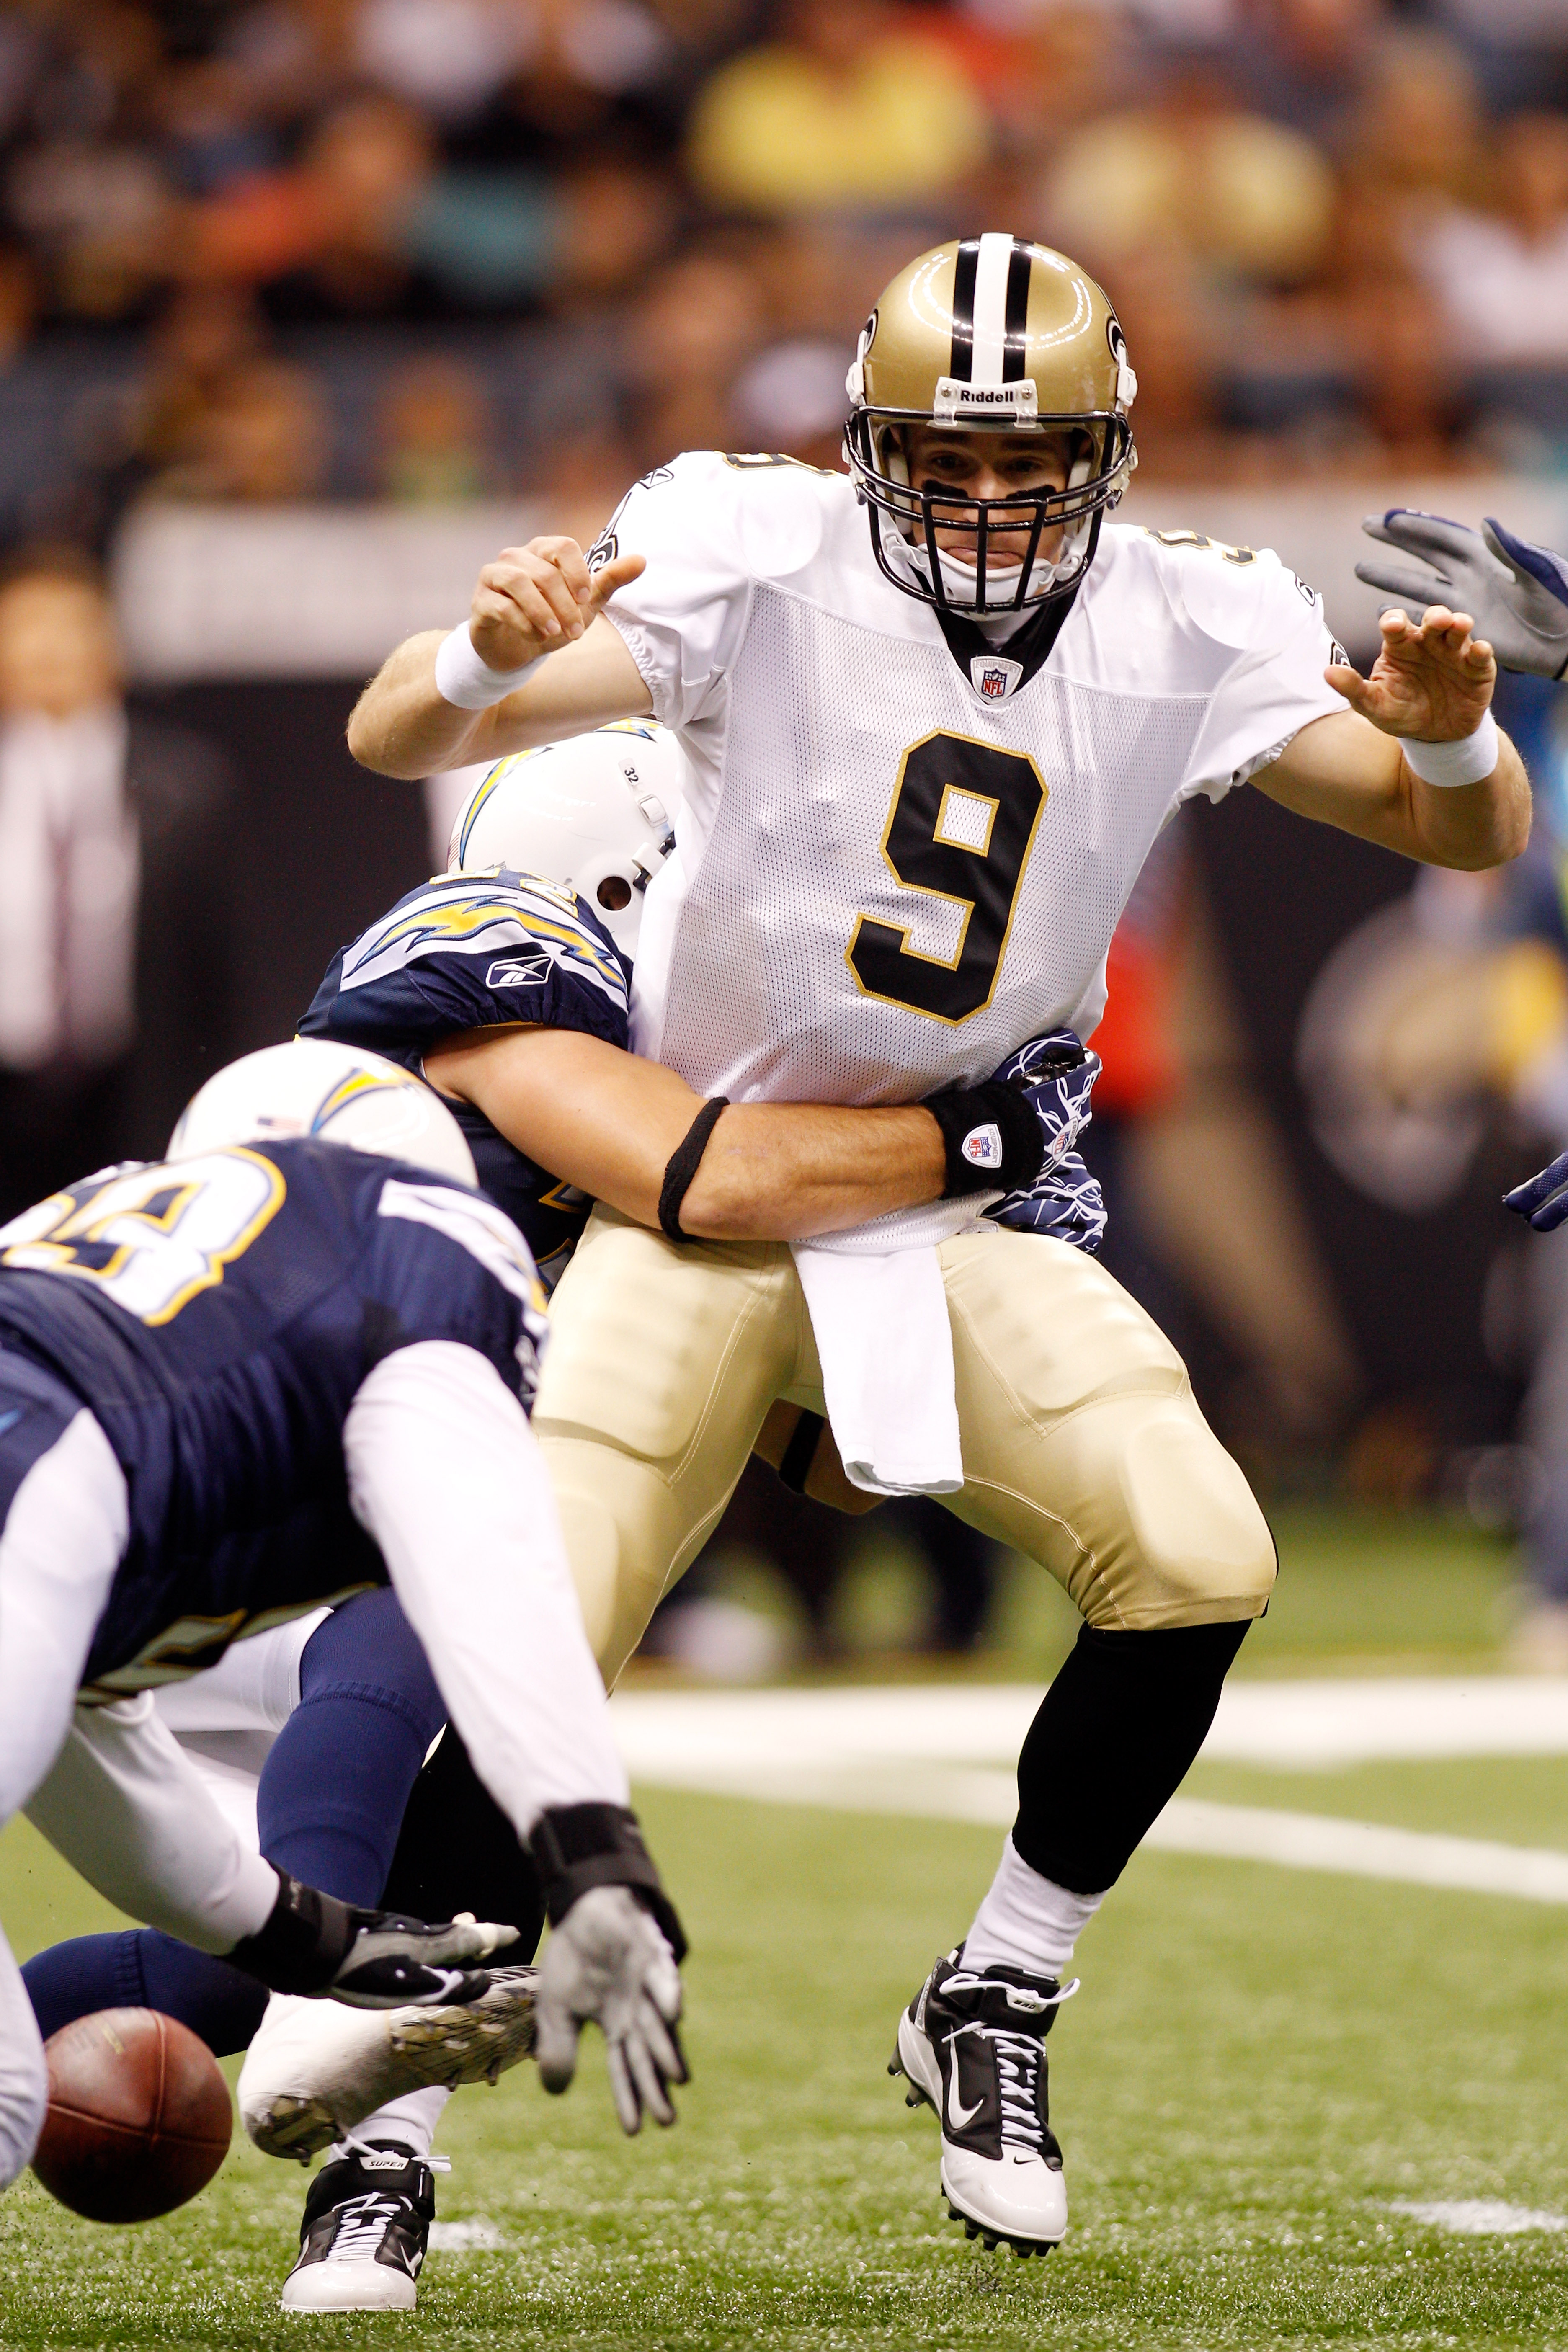 NEW ORLEANS - AUGUST 27:  Eric Weddle #32 of the San Diego Chargers strips the ball from Drew Brees #9 of the New Orleans Saints at the Louisiana Superdome on August 27, 2010 in New Orleans, Louisiana.  (Photo by Chris Graythen/Getty Images)